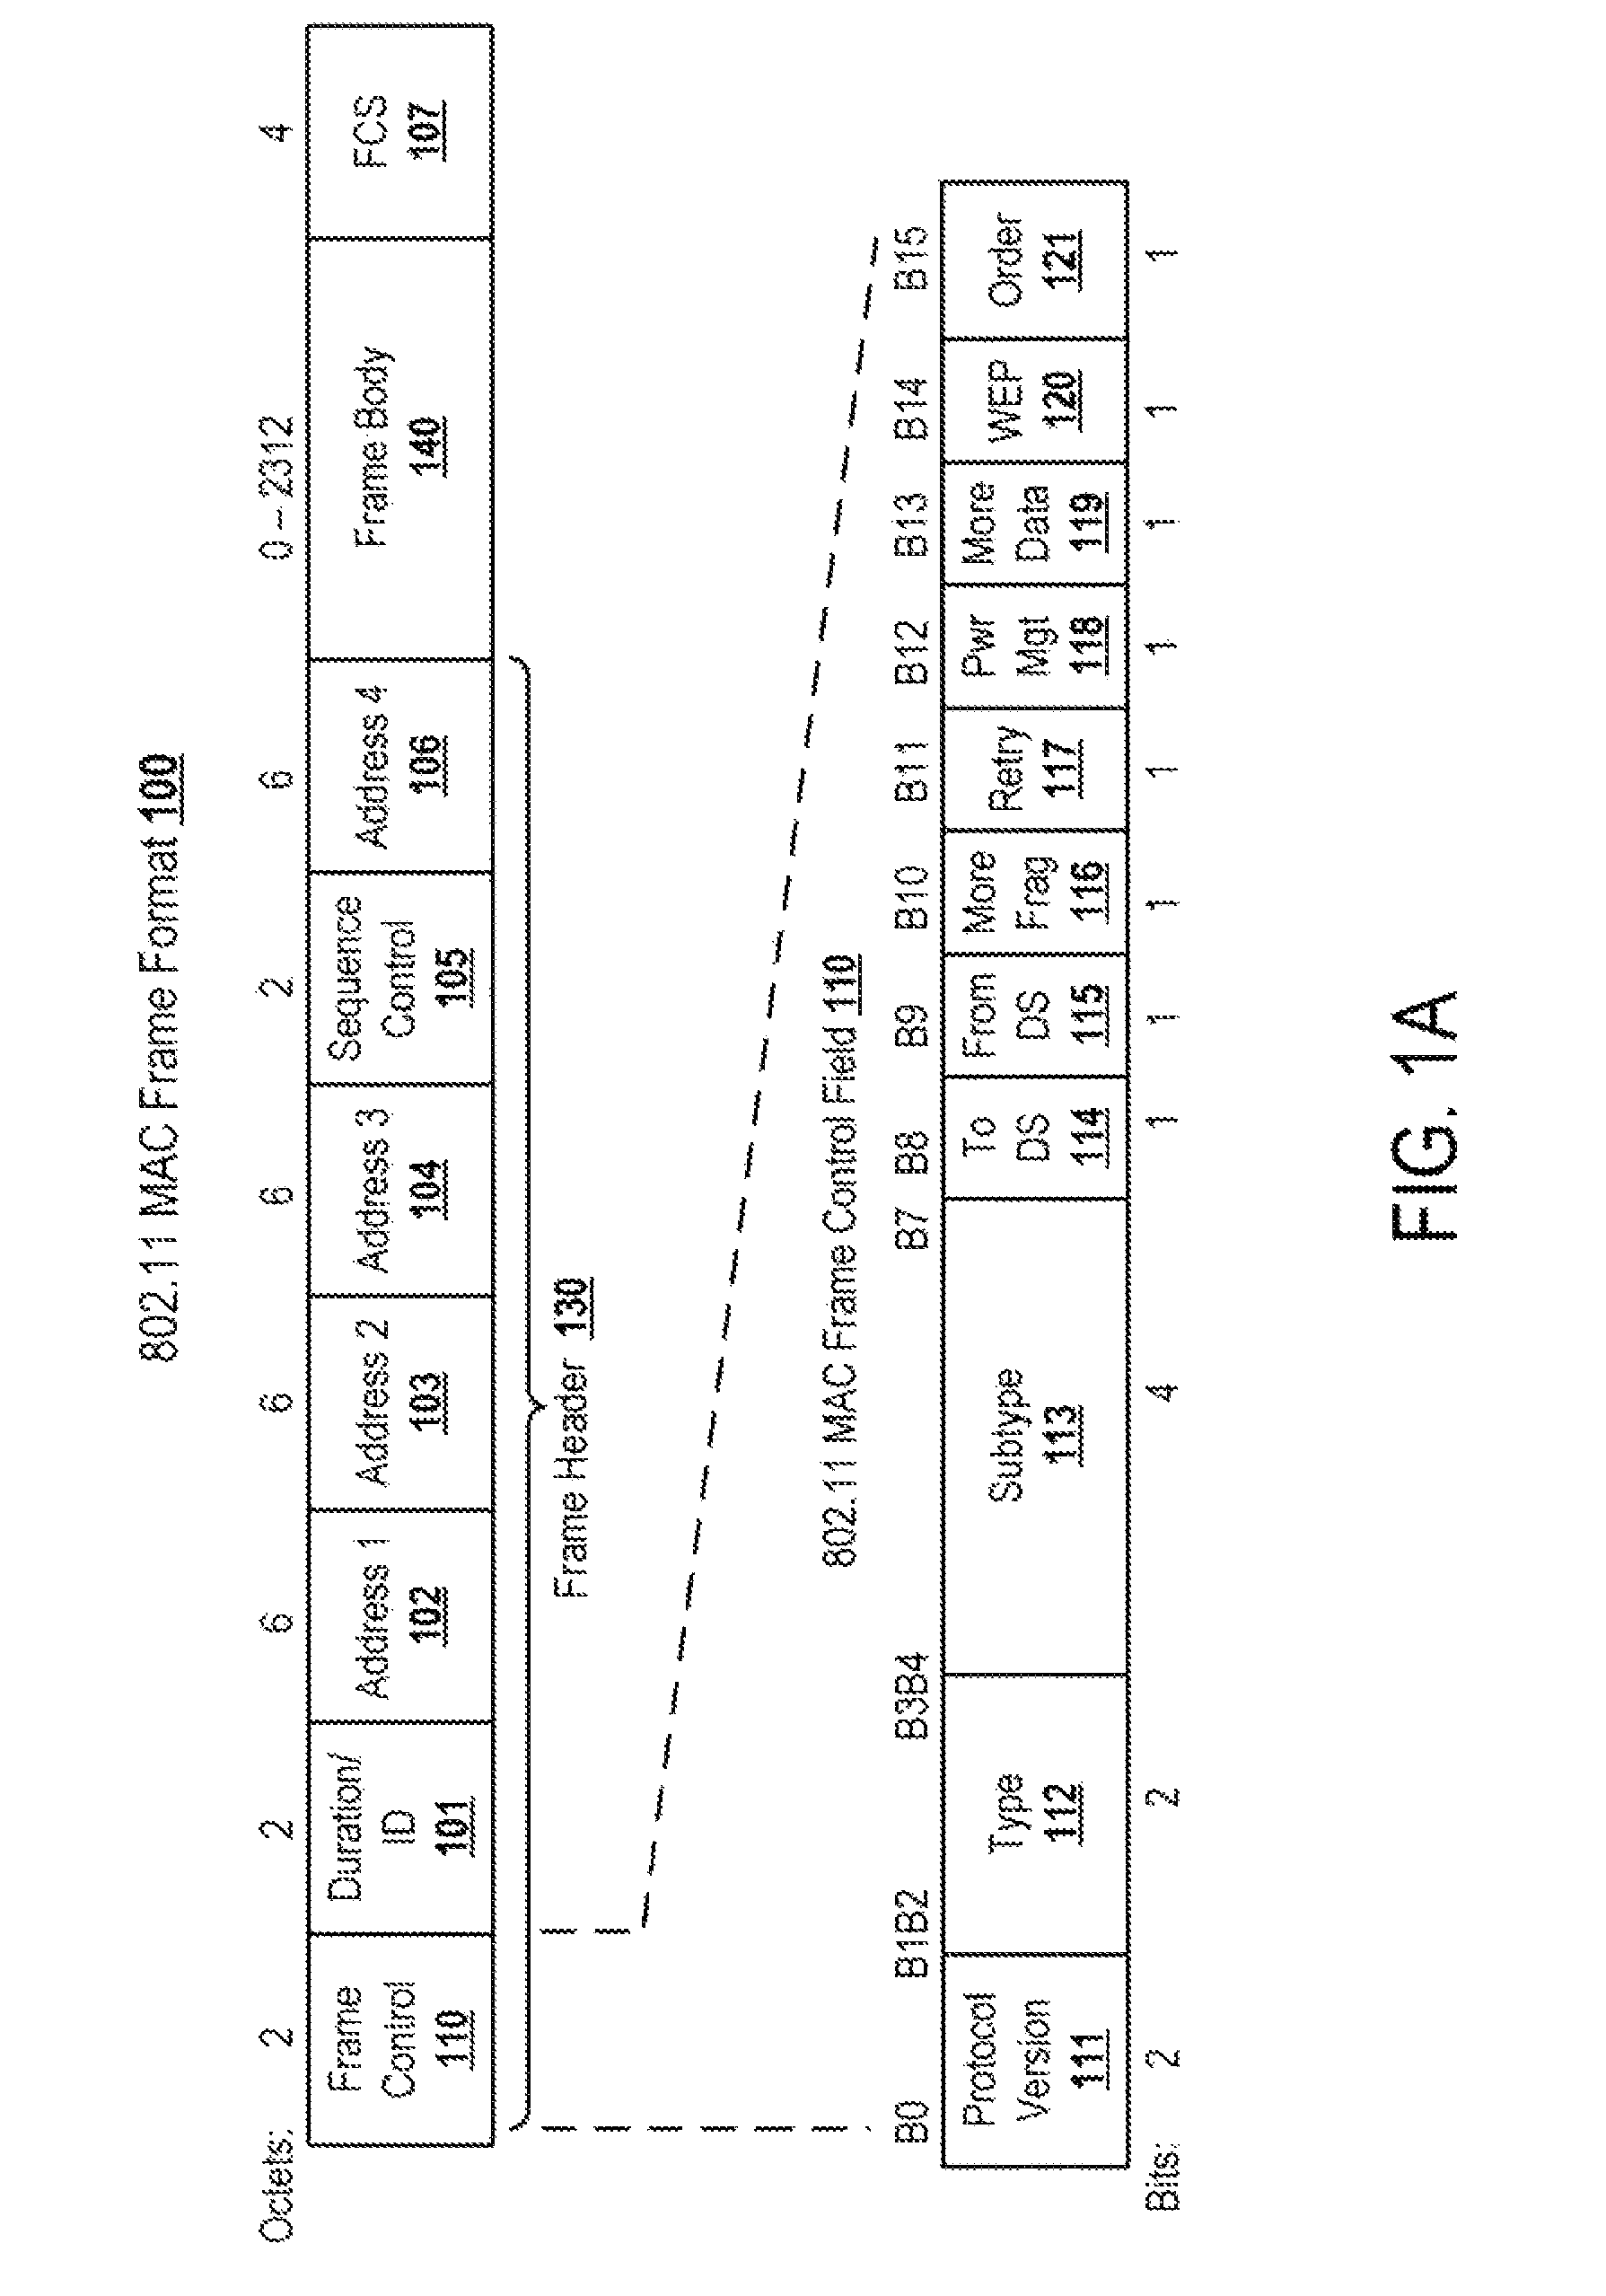 Systems and methods for wireless network content filtering